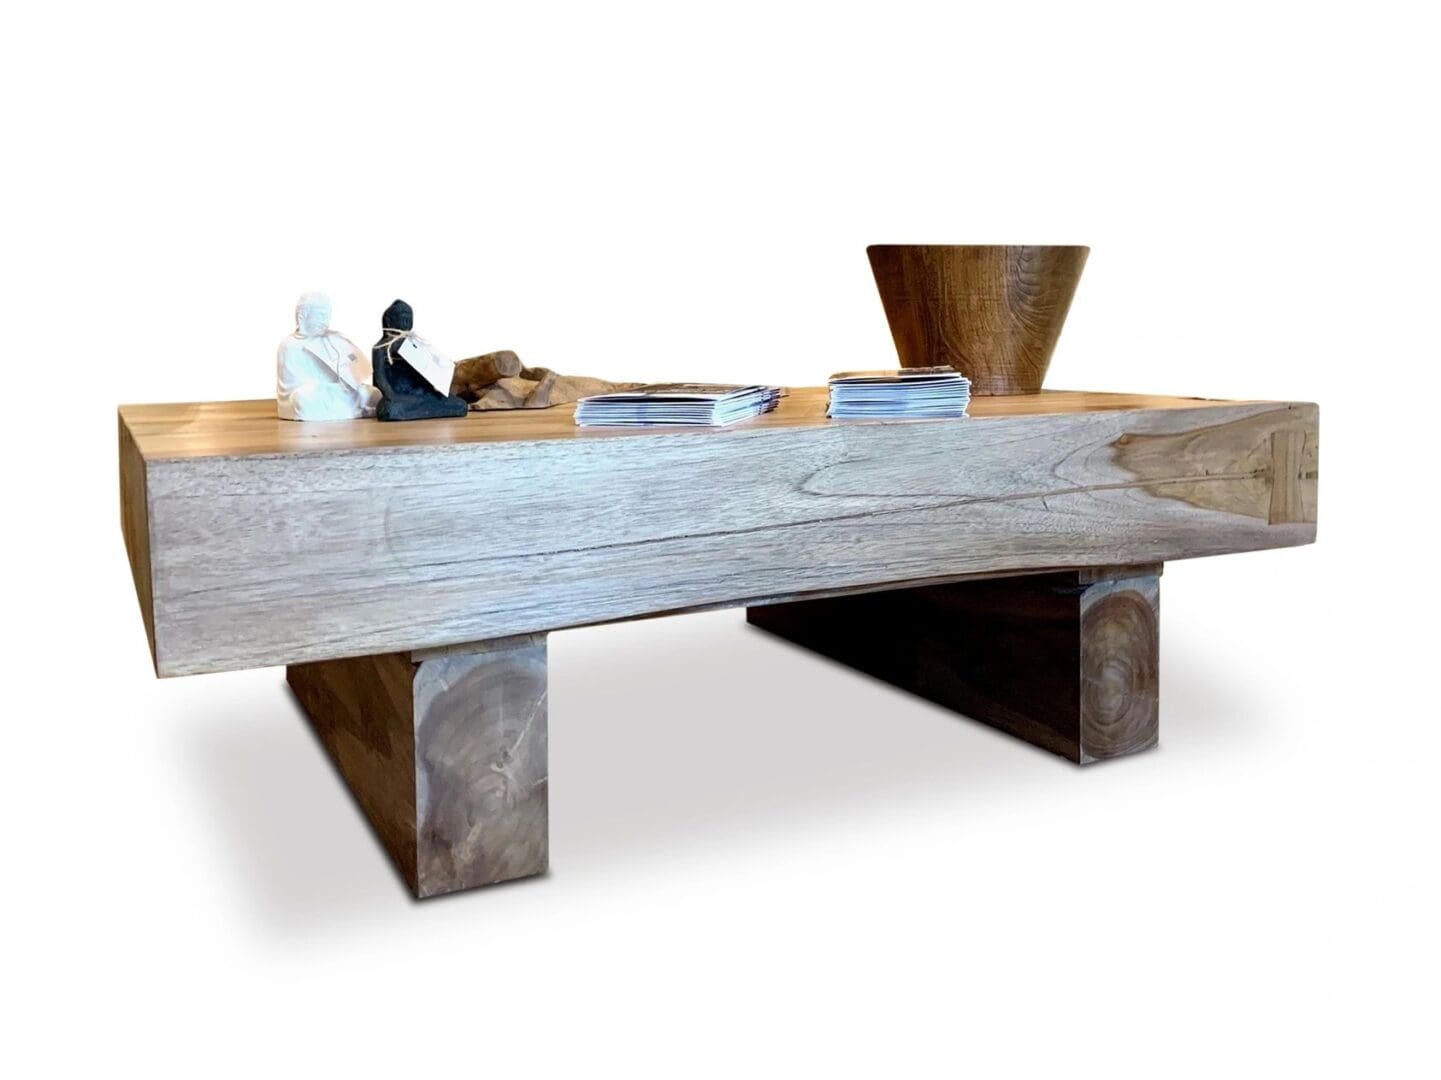 A wooden table with two people sitting on it.